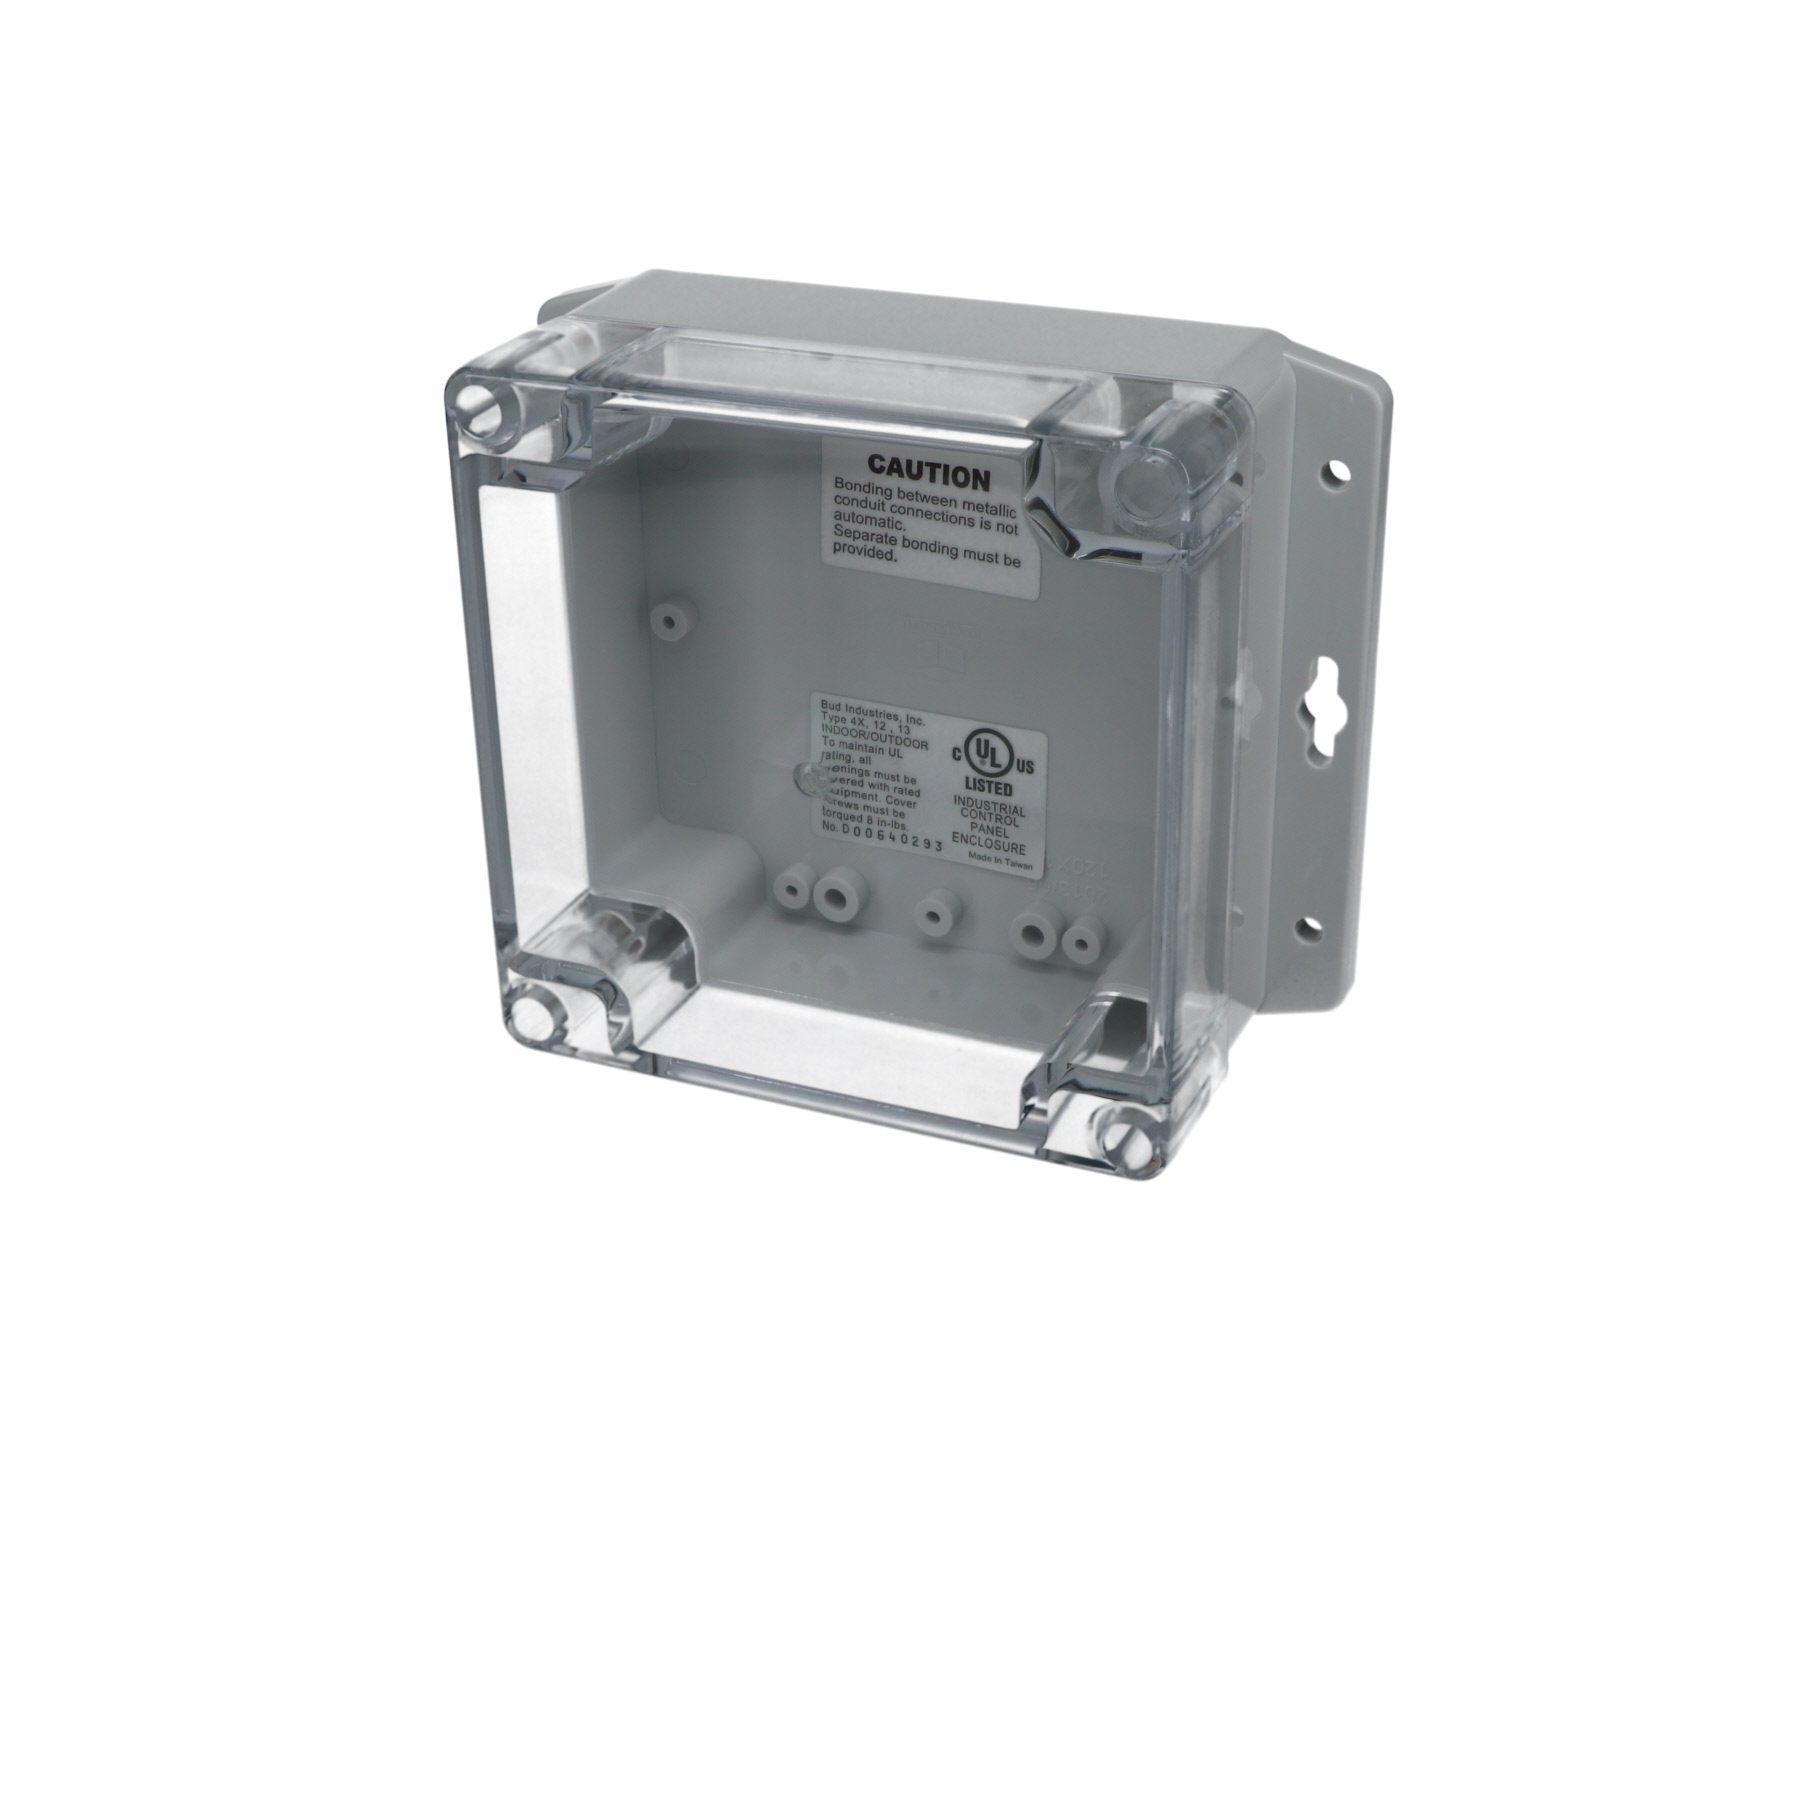 IP65 NEMA 4X Box with Clear Cover and Mounting Brackets PN-1336-CMB